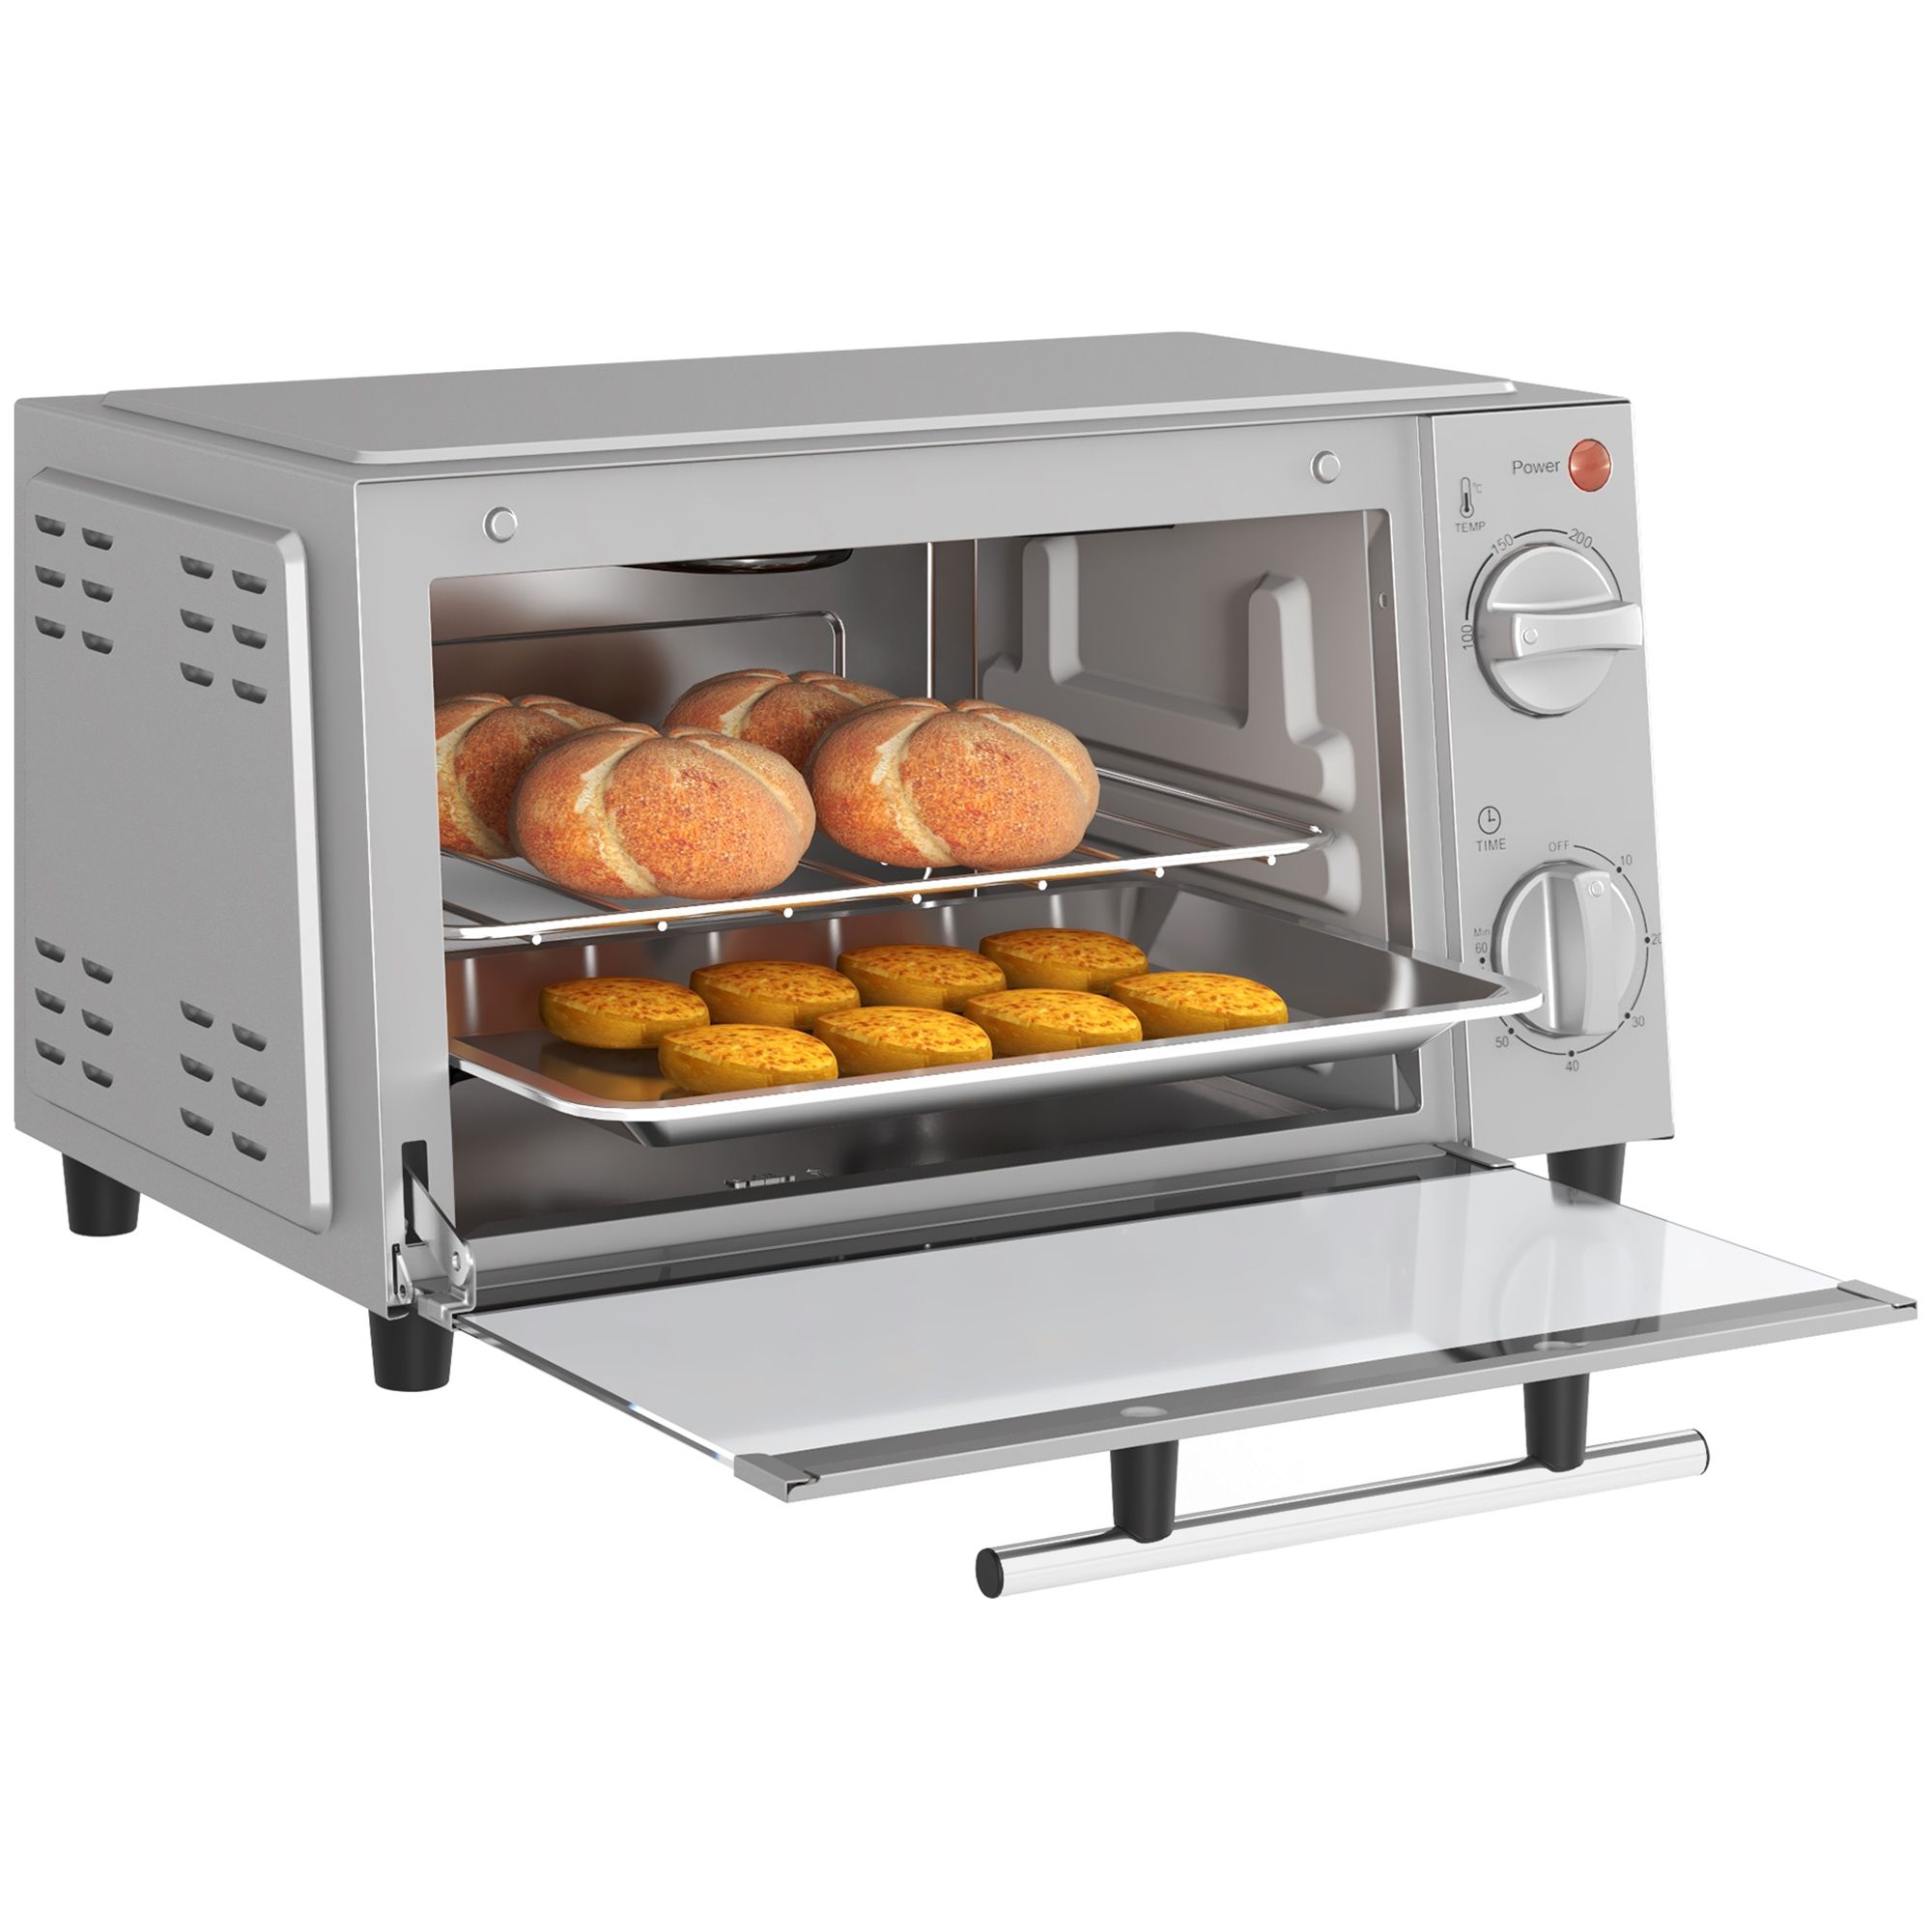 Homcom Mini Oven, 9l Countertop Electric Grill, Toaster Oven With Adjustable Temperature, Timer, Baking Tray And Wire Rack, 750w, Silver